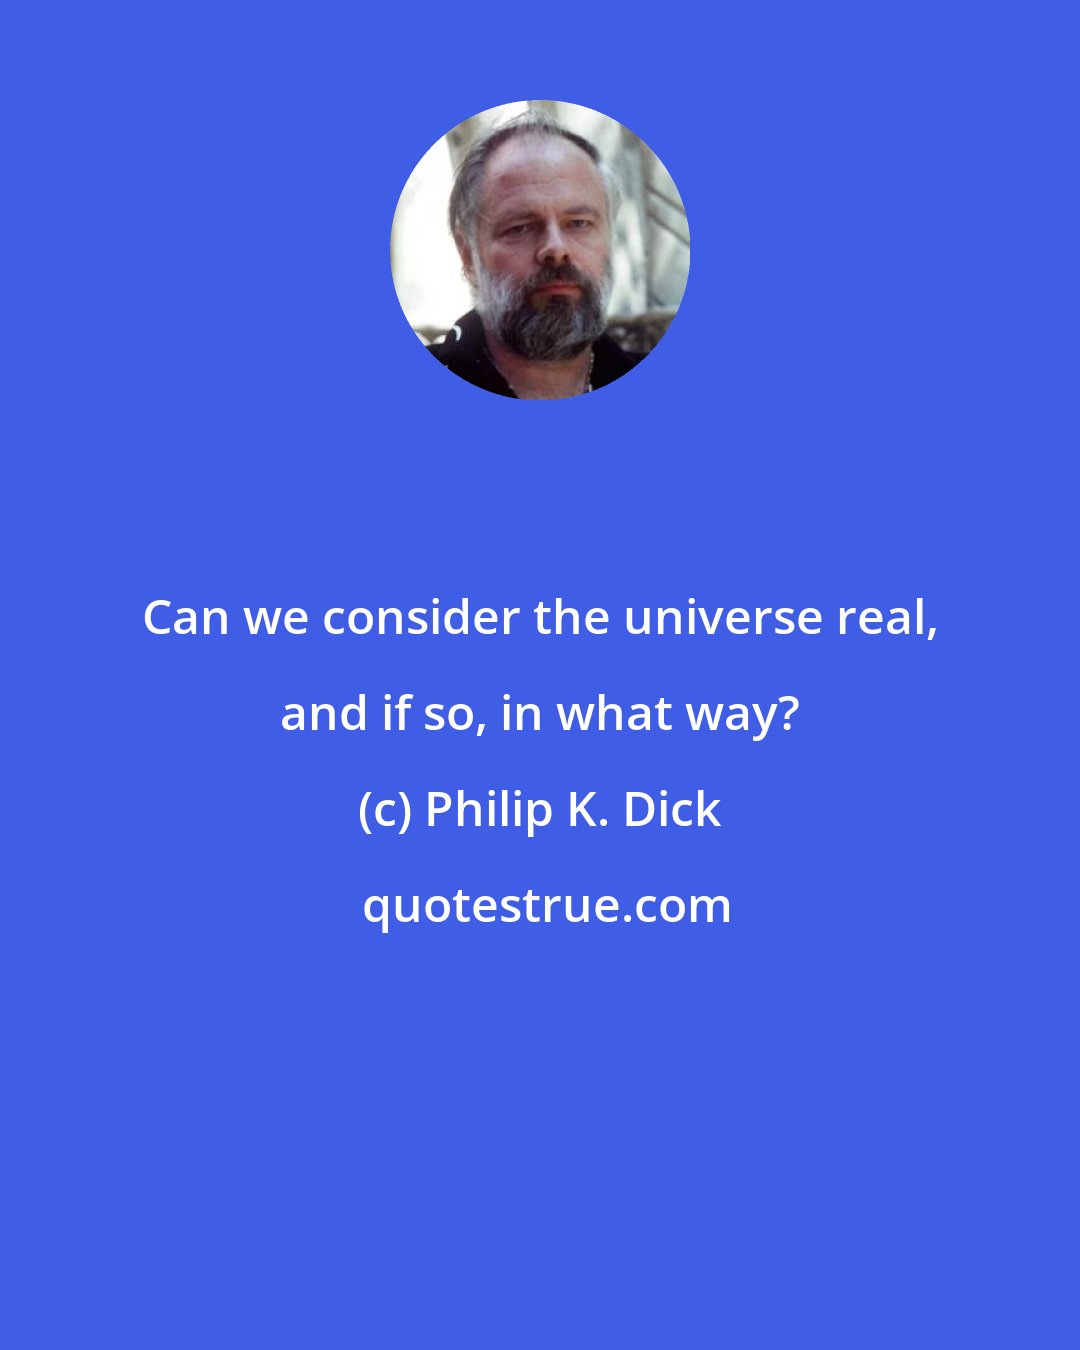 Philip K. Dick: Can we consider the universe real, and if so, in what way?